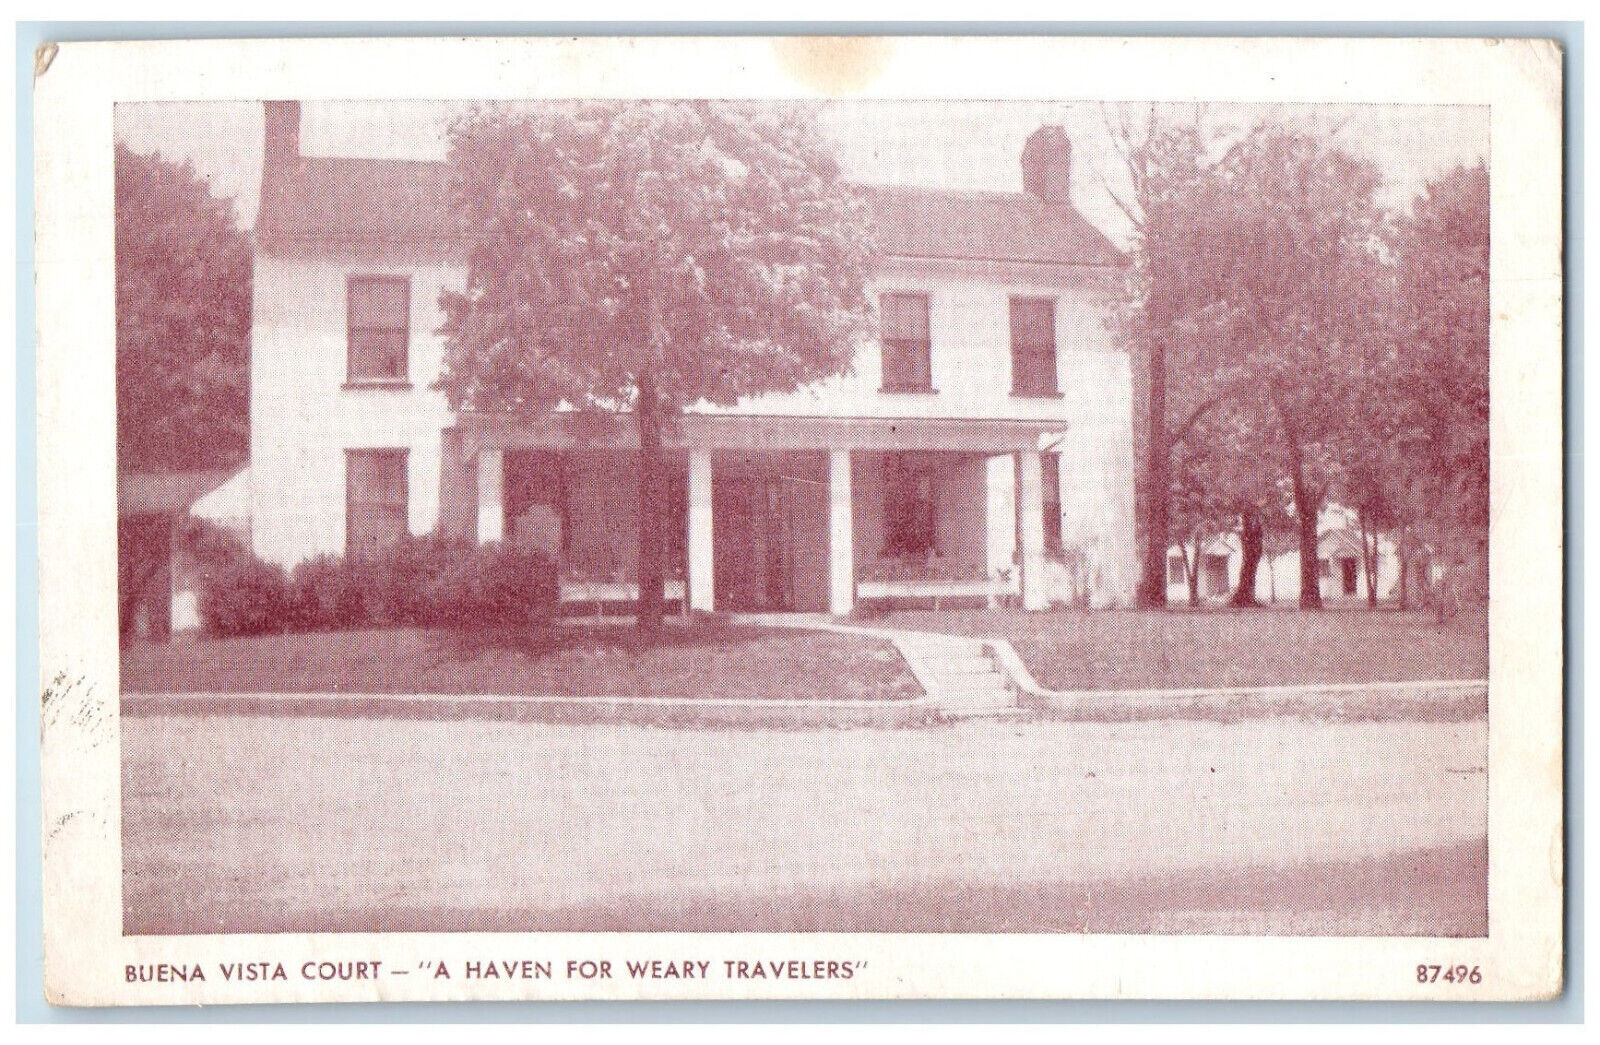 1951 A Haven For Weary Travelers Buena Vista Court Posted Vintage Postcard